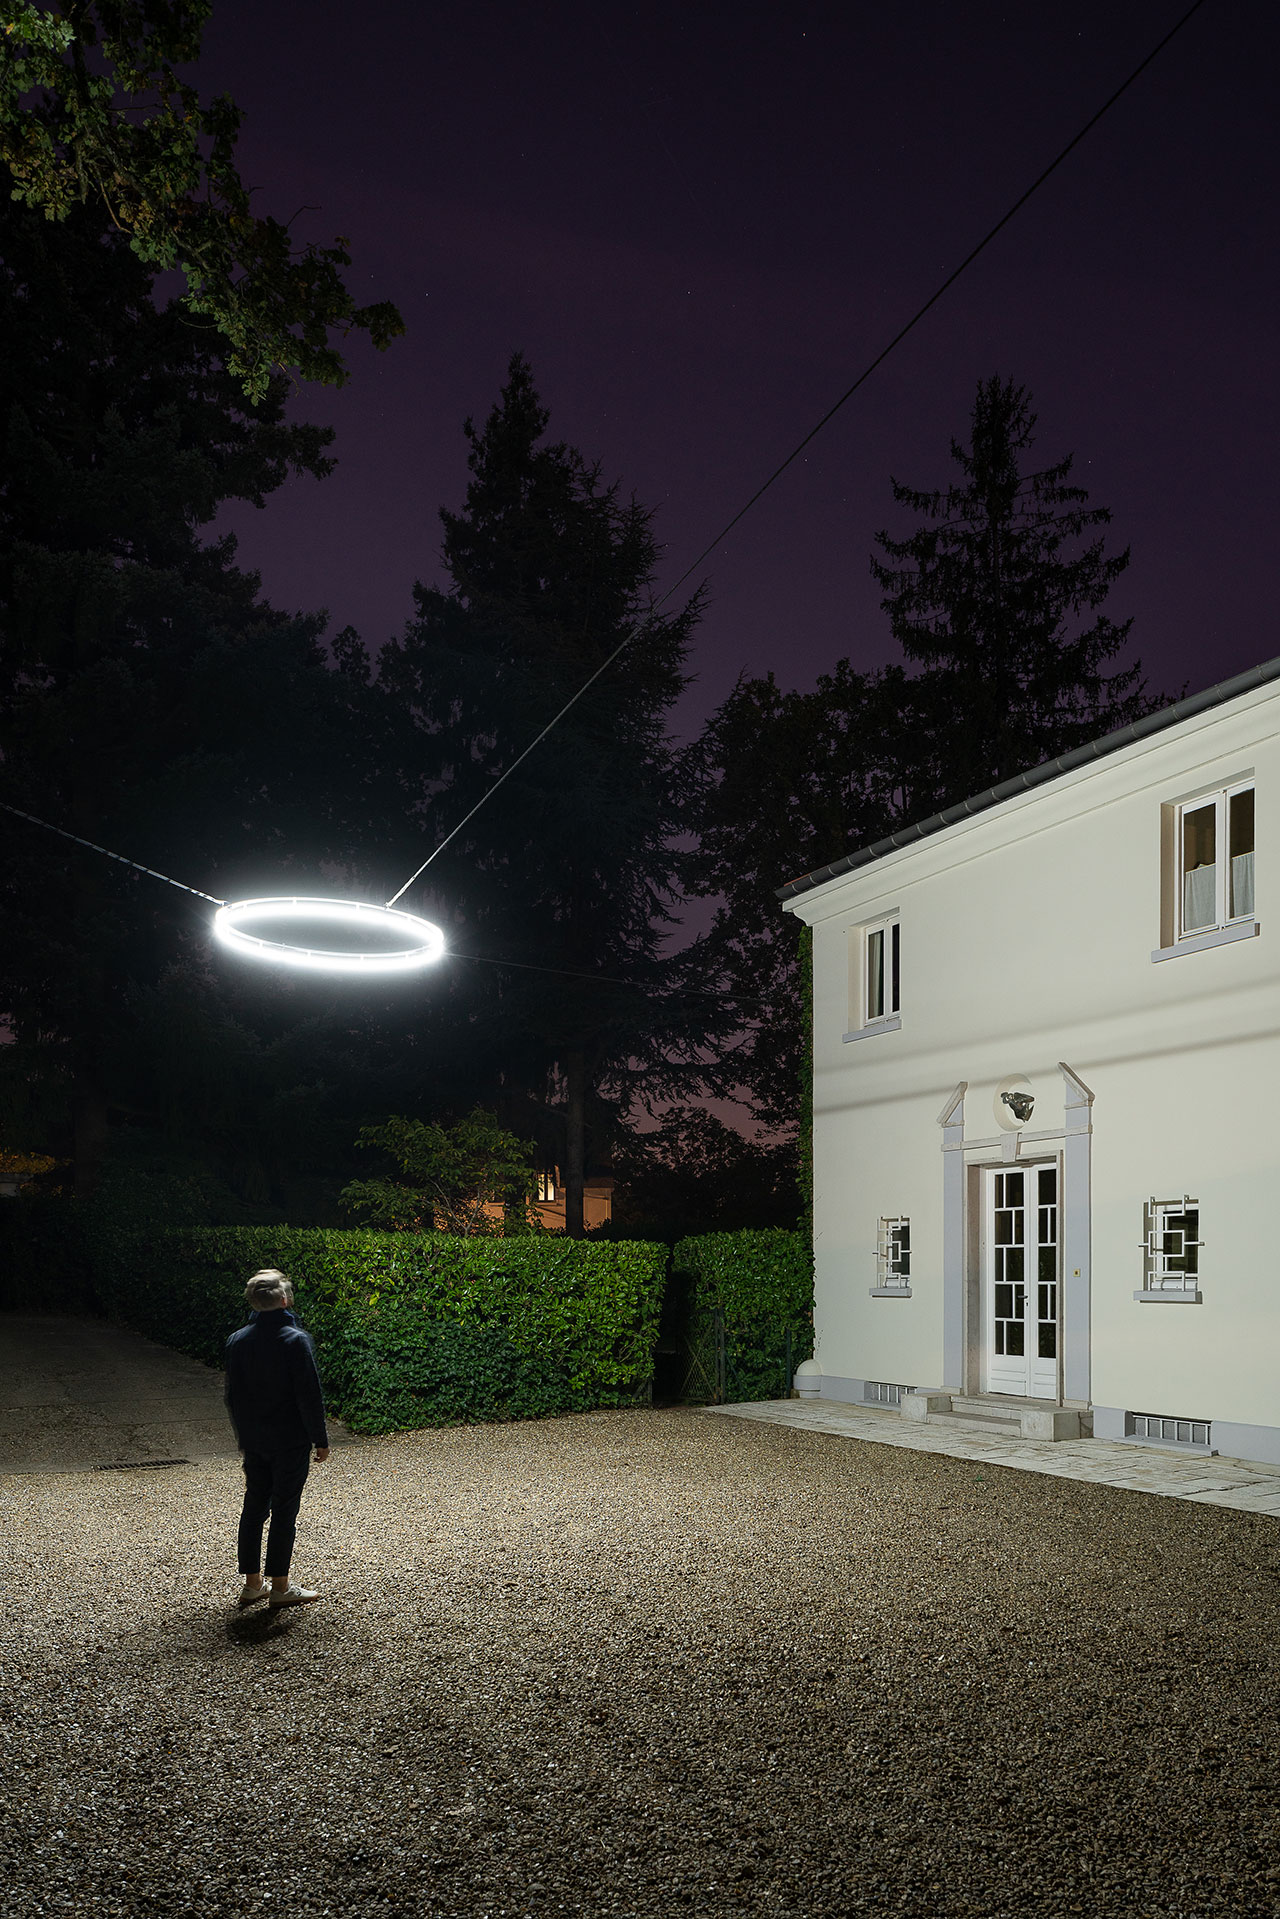 "Le Saint" light installation by Franklin Azzi commissioned for Genius Loci at L'Ange Volant.
© Le Saint, Franklin Azzi, 2021. Photography Stéphane Aboudaram | We Are Content(S)